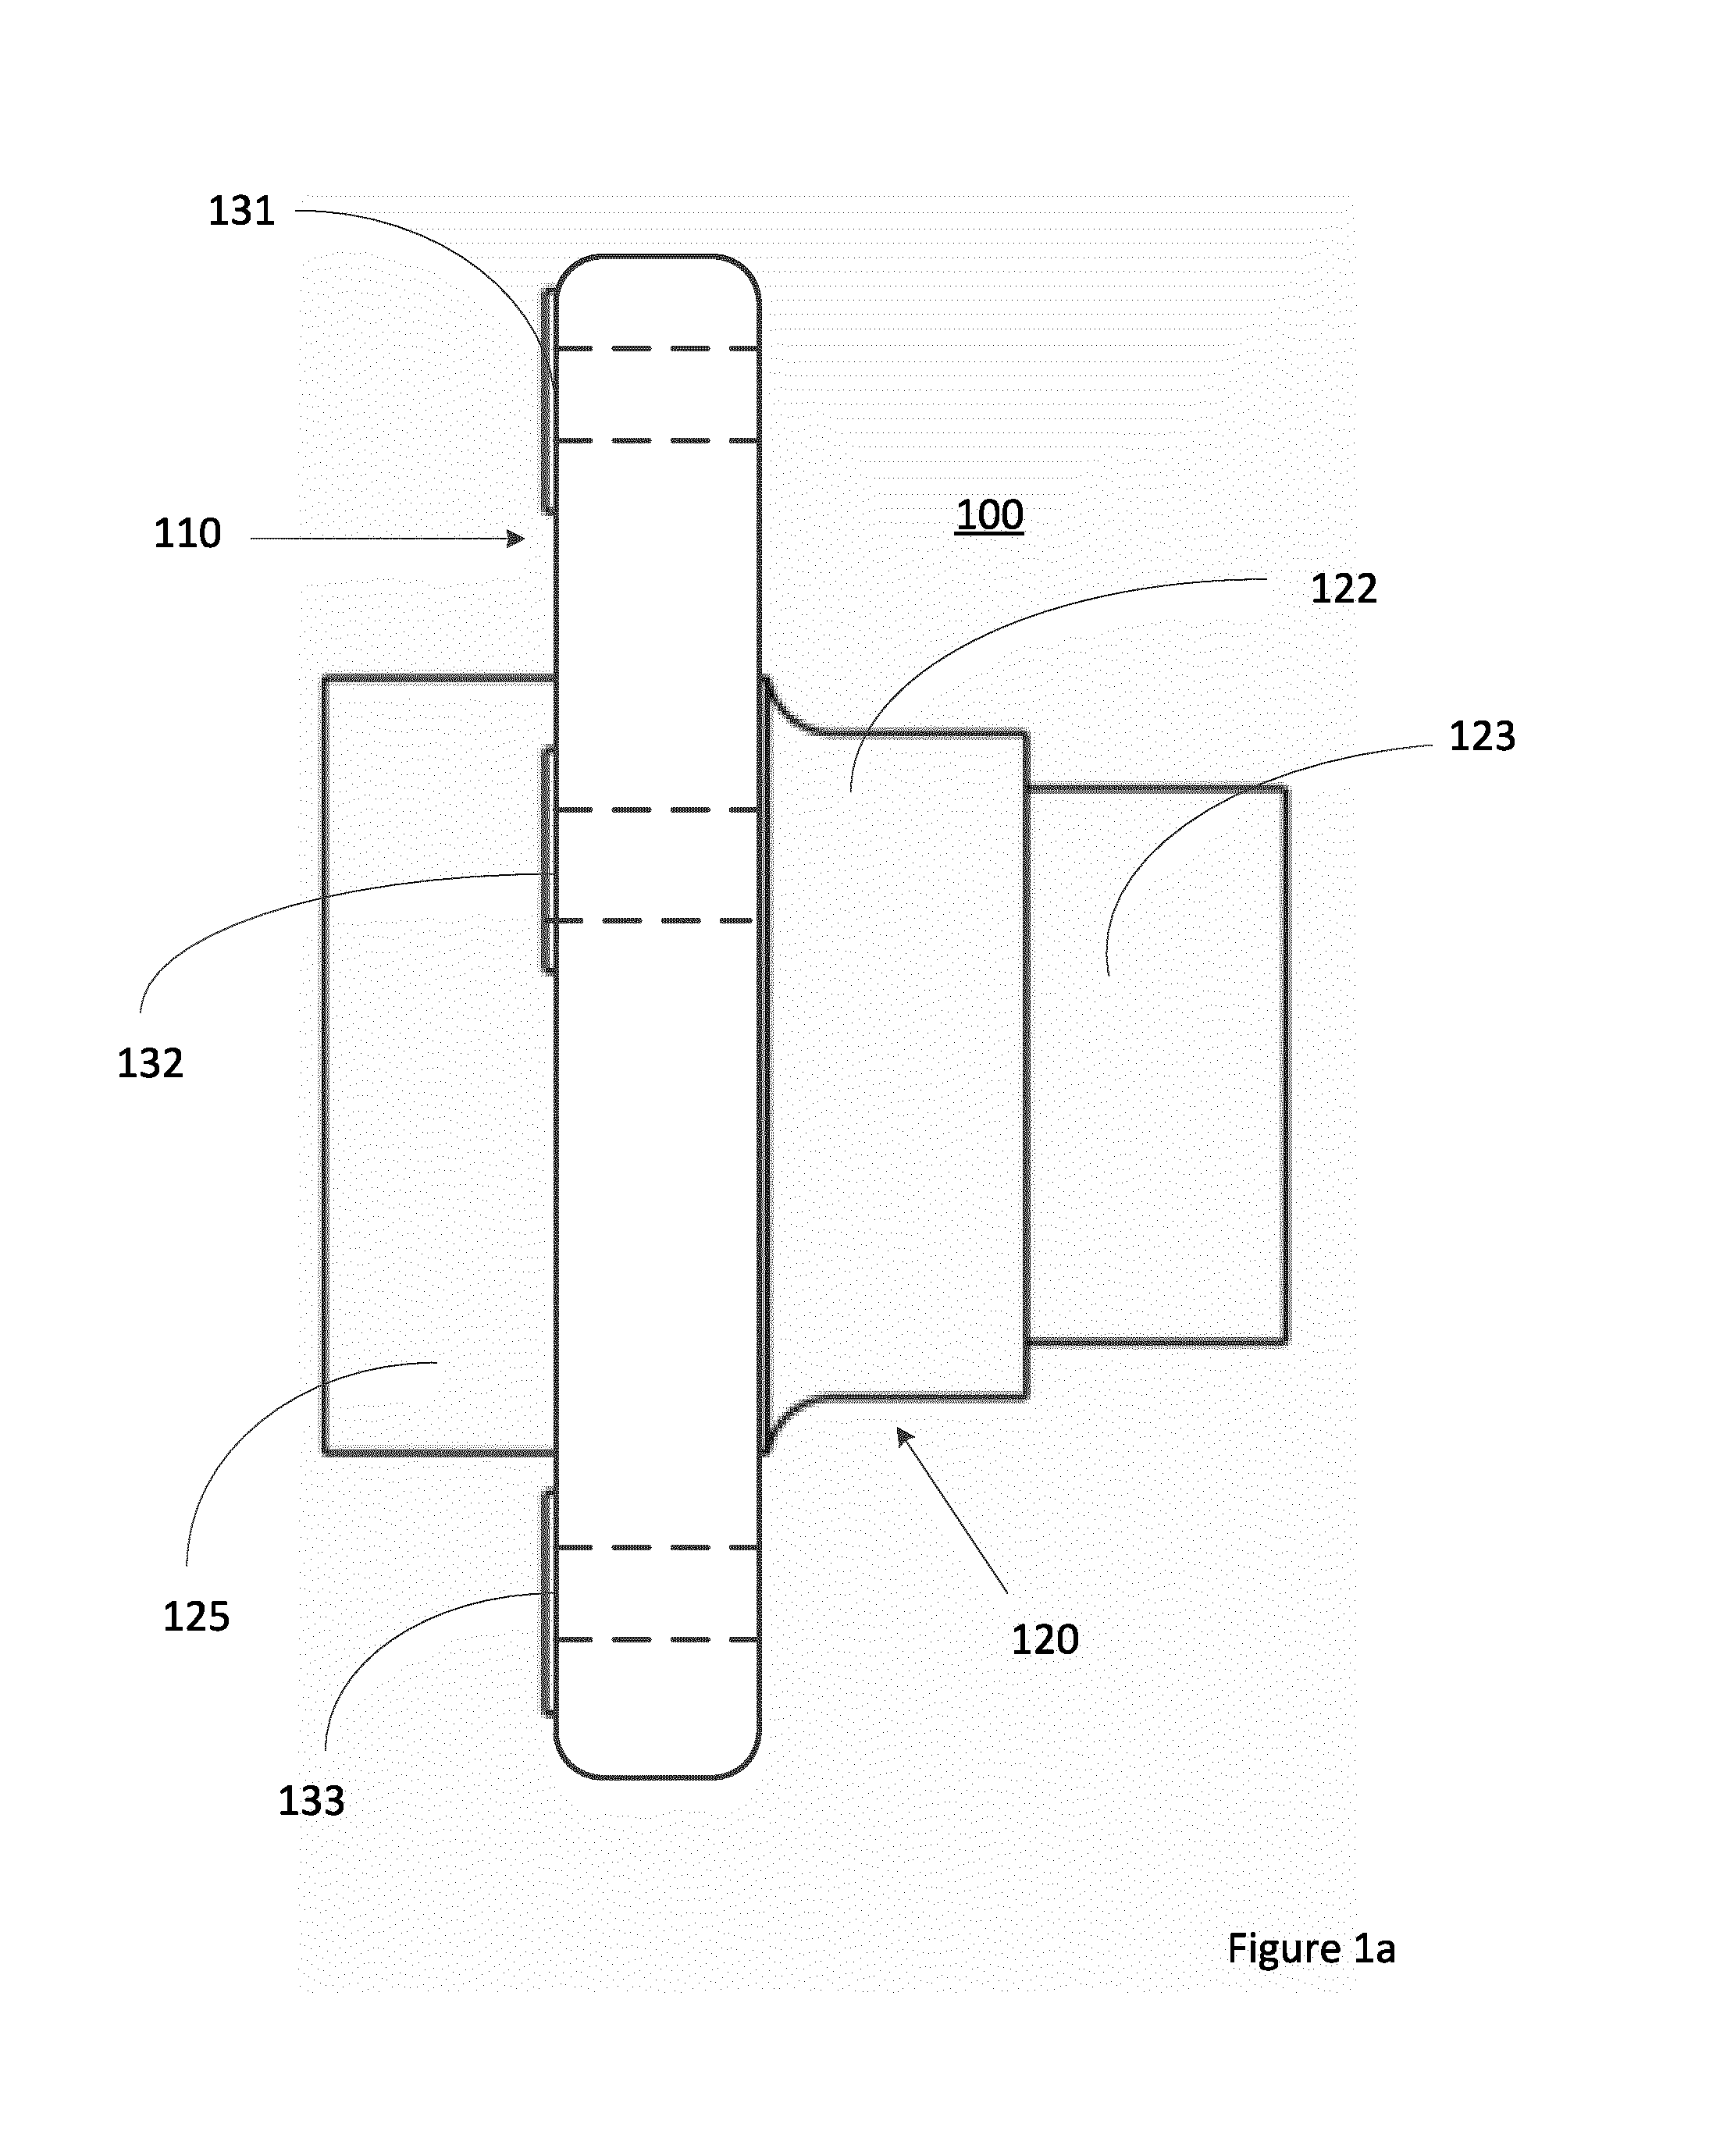 Bearing component with composite flange